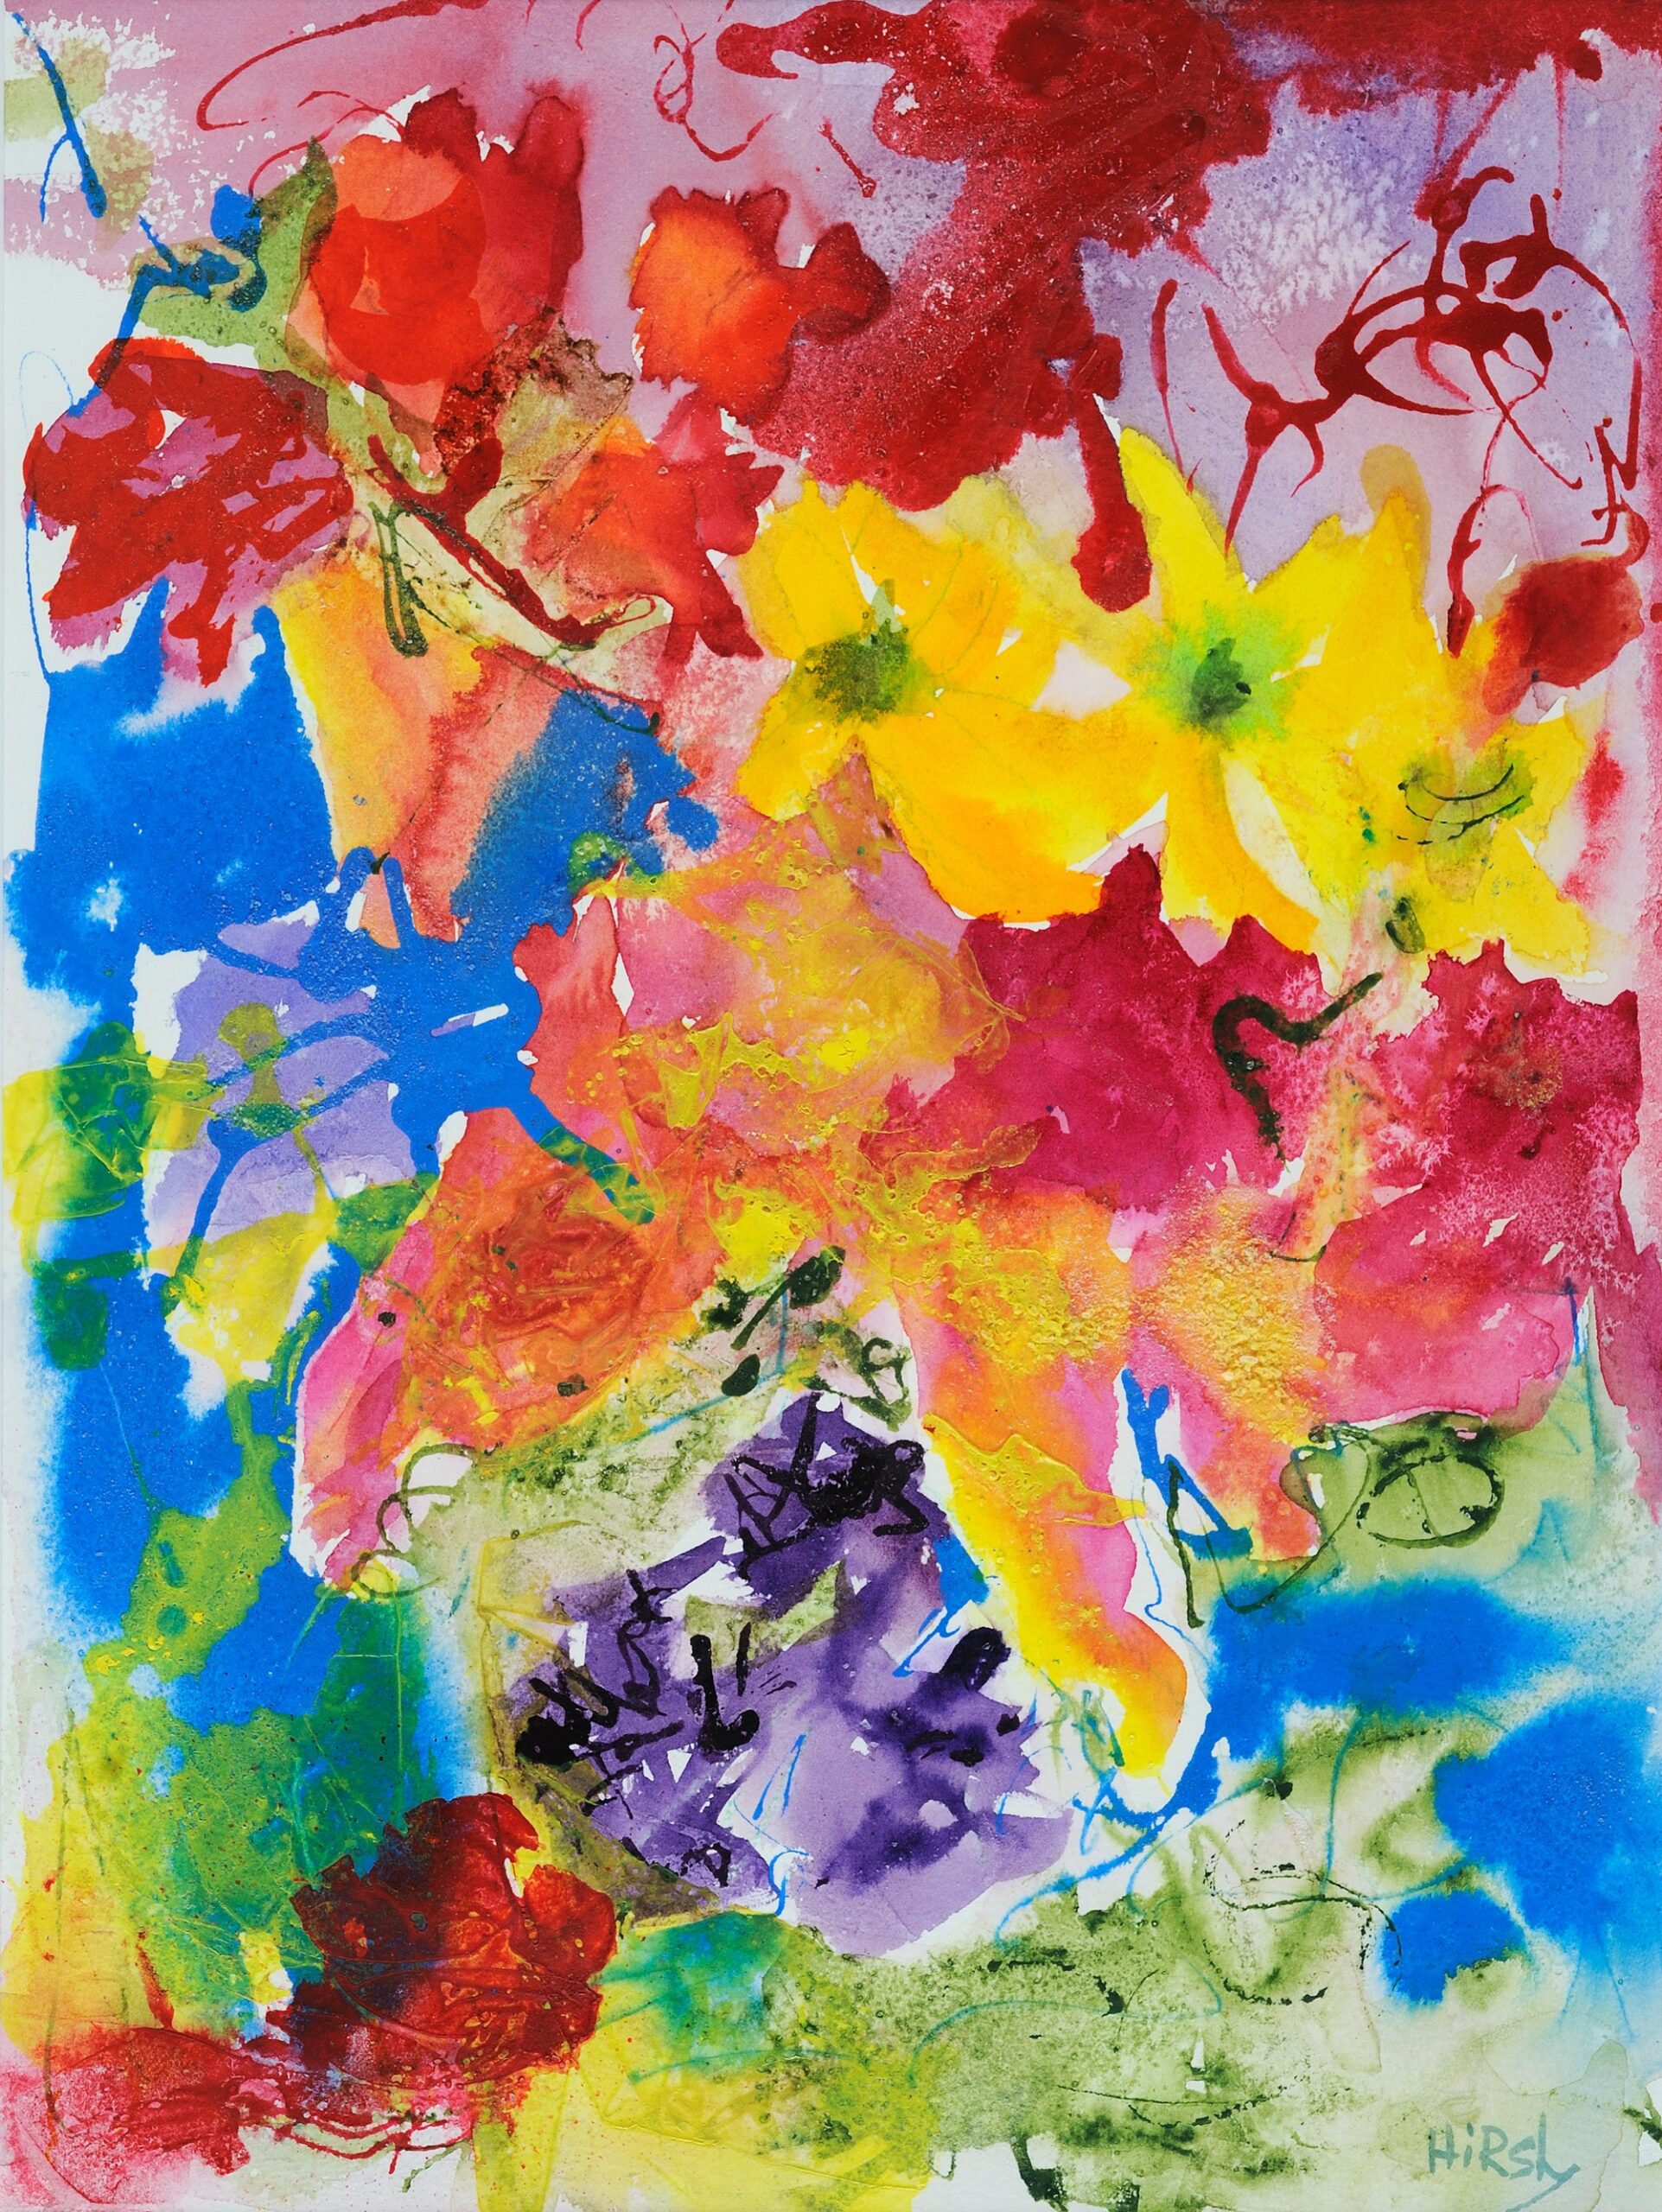 A painting that is an abstract take on flowers in rainbow colors.